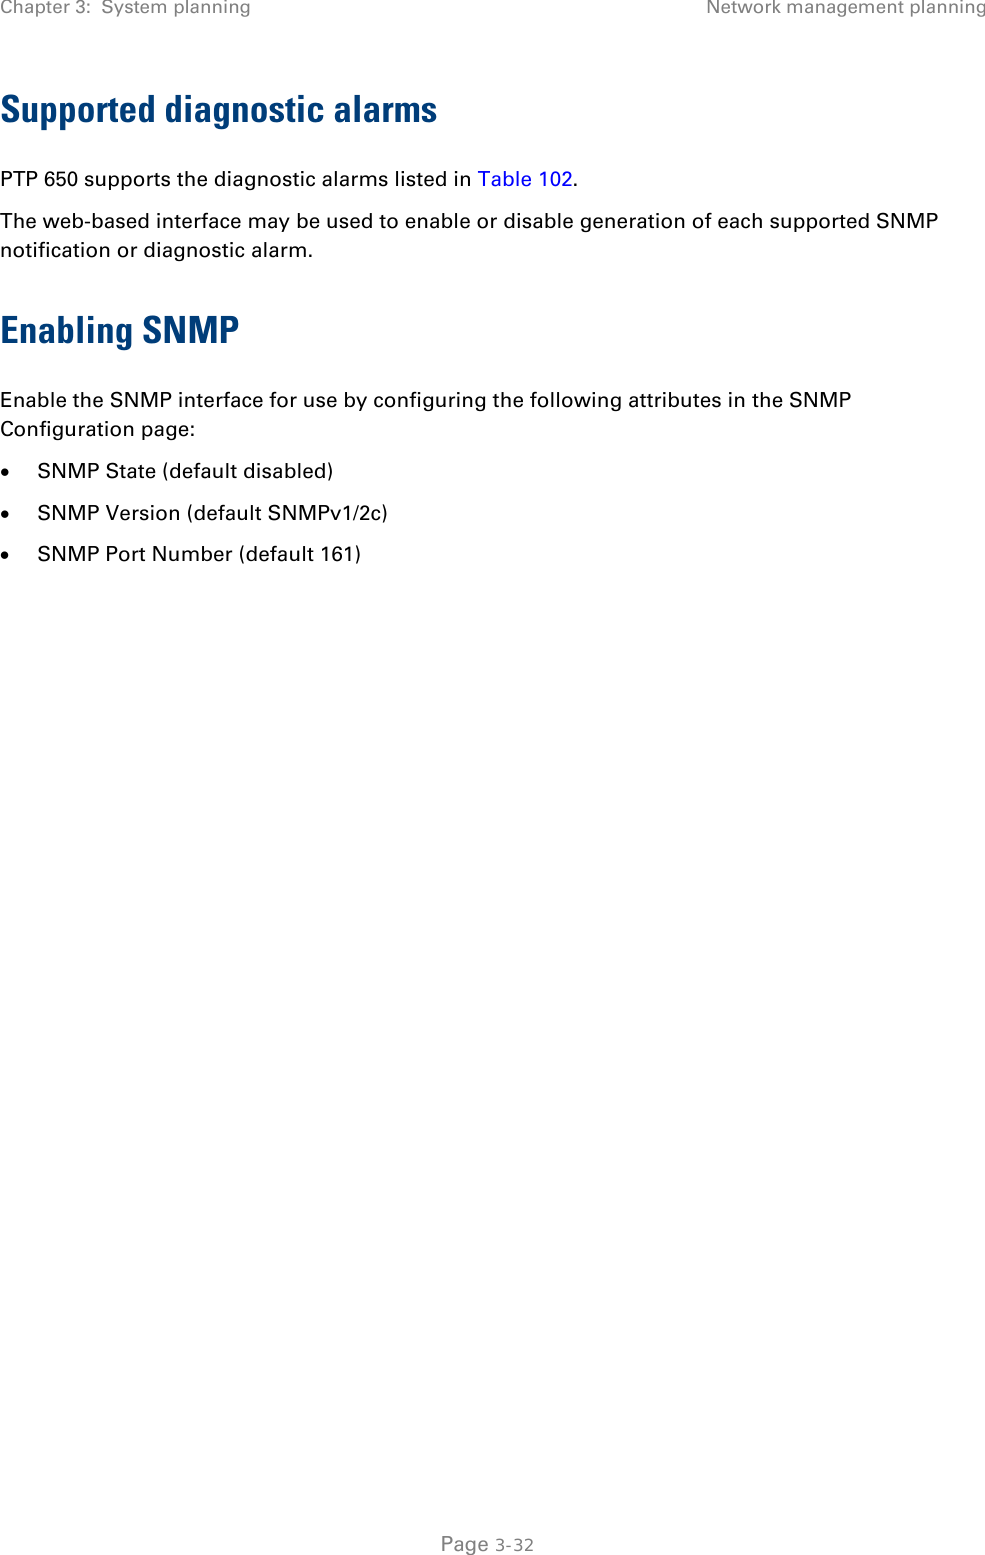 Chapter 3:  System planning Network management planning  Supported diagnostic alarms PTP 650 supports the diagnostic alarms listed in Table 102. The web-based interface may be used to enable or disable generation of each supported SNMP notification or diagnostic alarm. Enabling SNMP Enable the SNMP interface for use by configuring the following attributes in the SNMP Configuration page: • SNMP State (default disabled) • SNMP Version (default SNMPv1/2c) • SNMP Port Number (default 161)     Page 3-32 